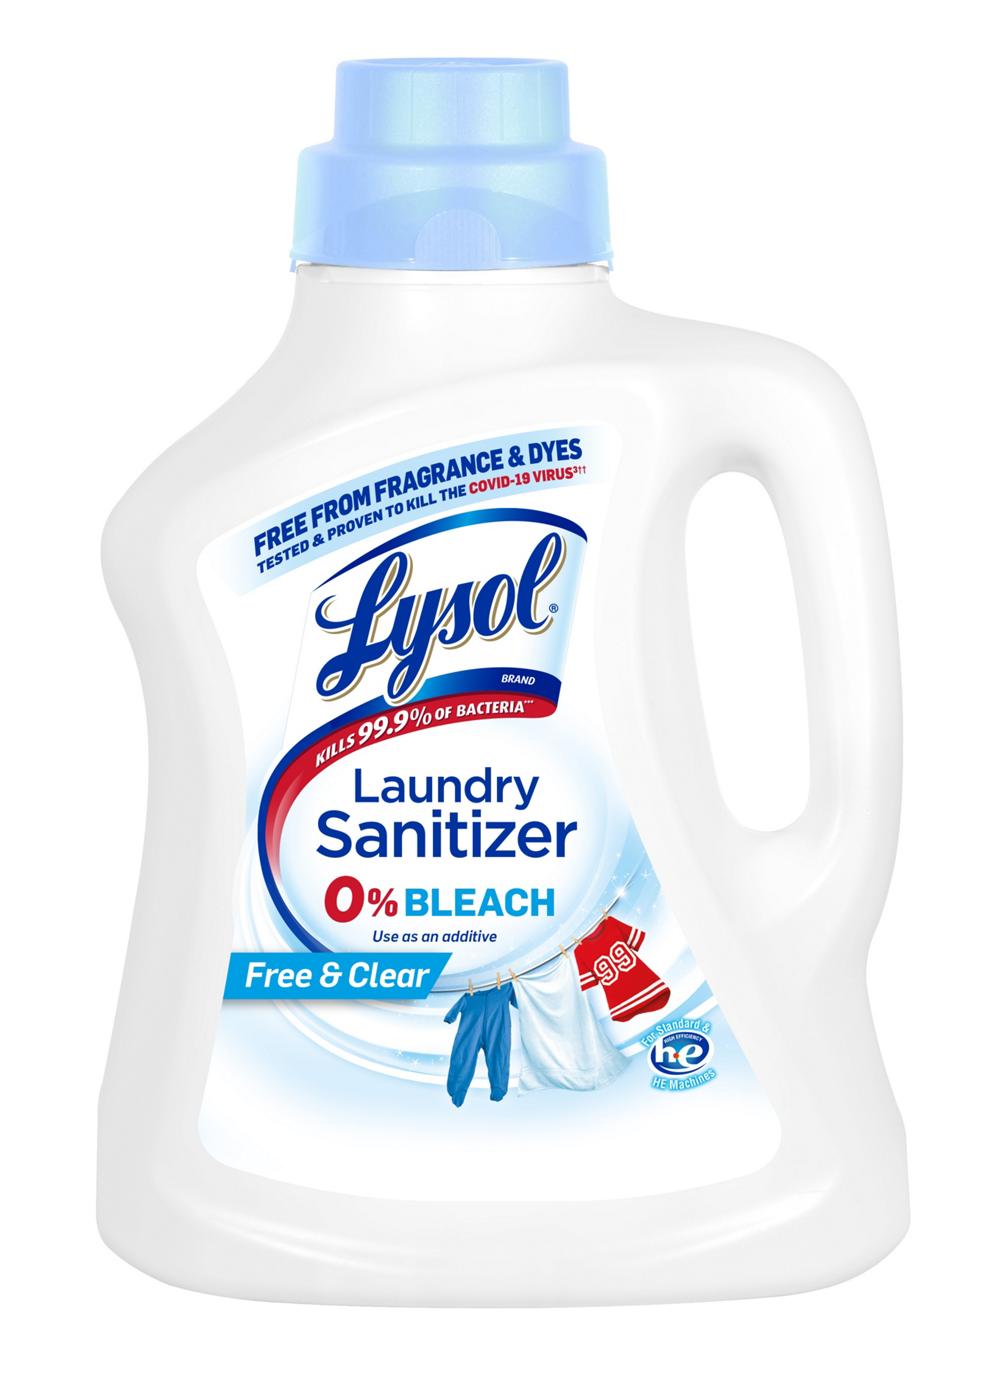 Lysol Free & Clear Laundry Sanitizer; image 1 of 2